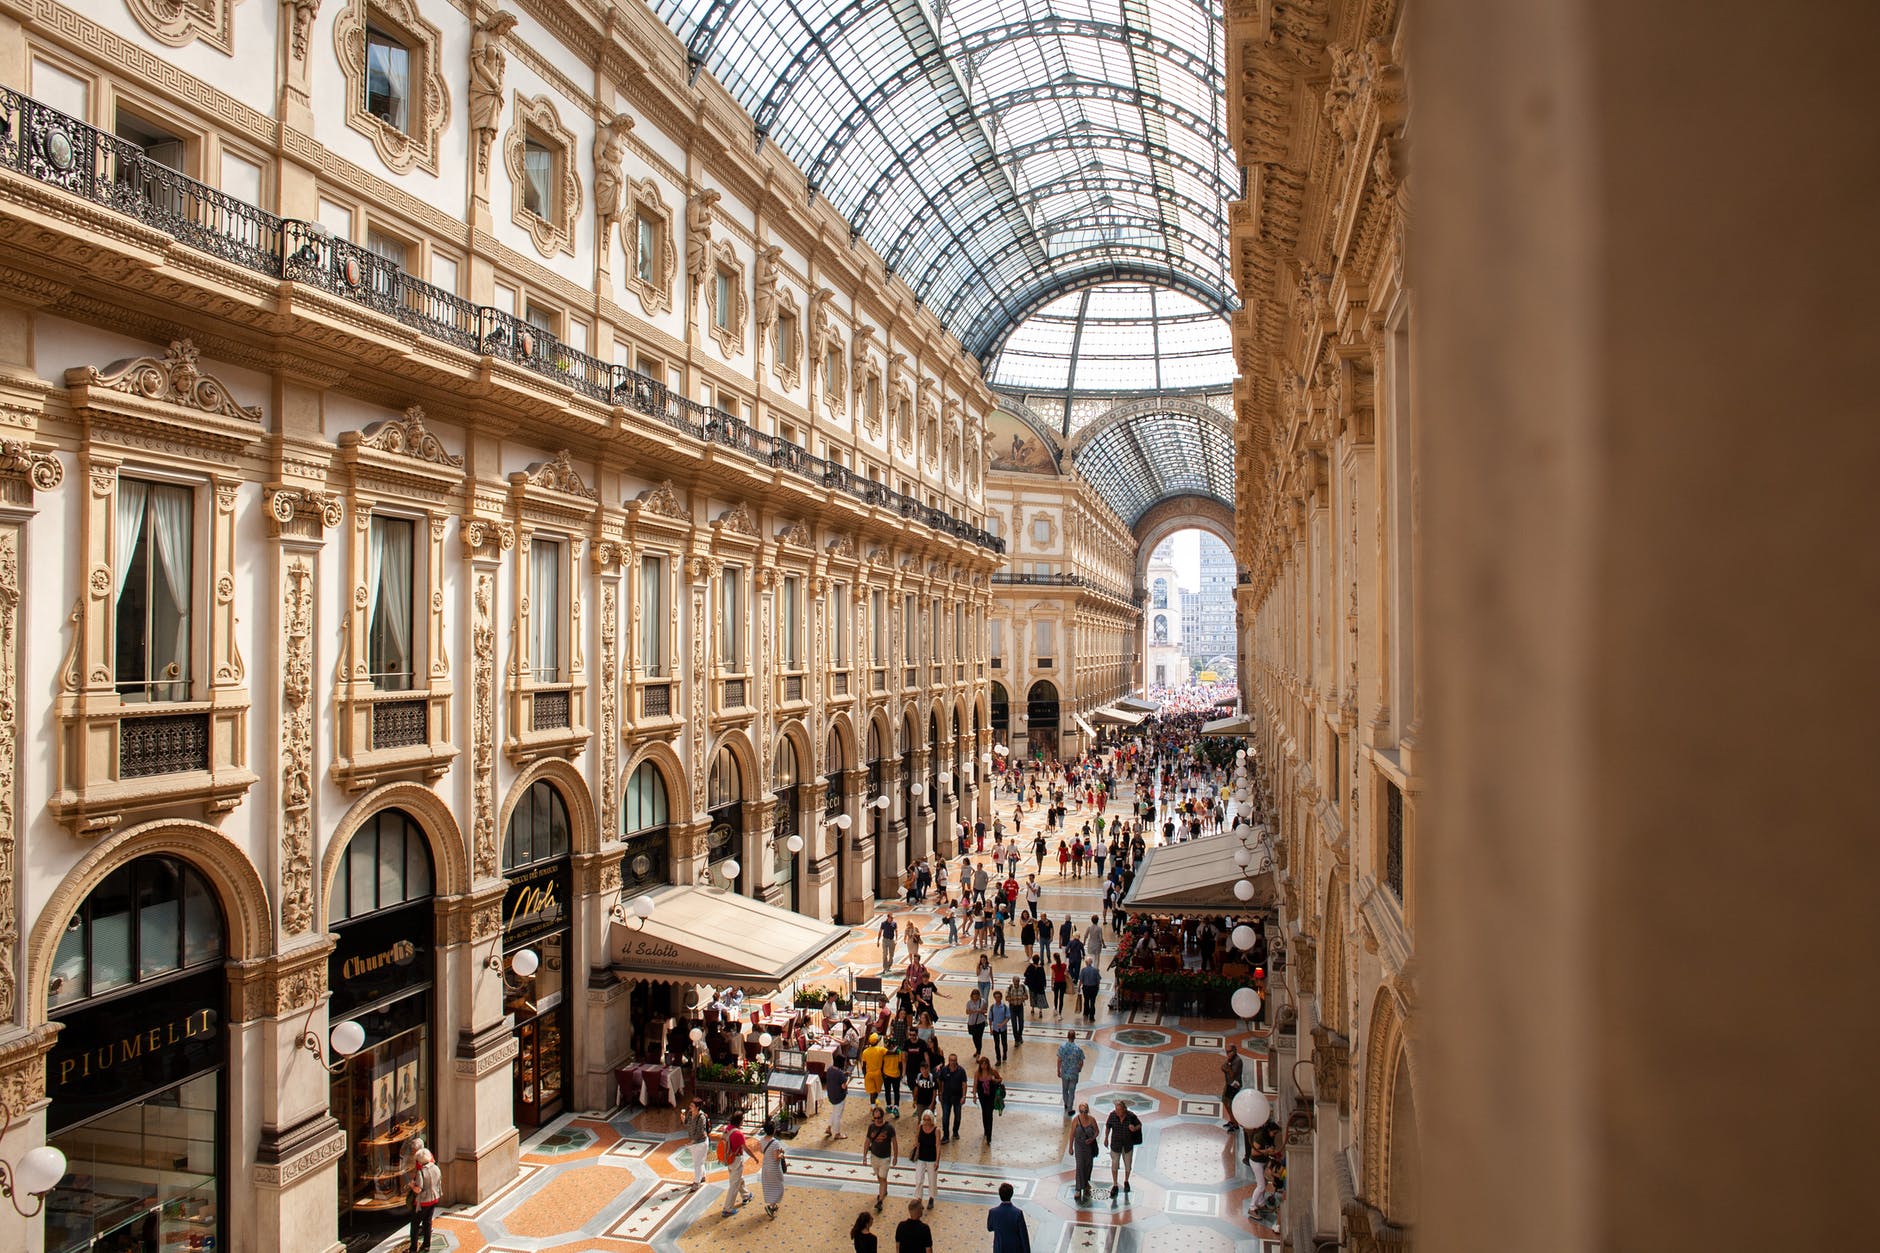 people inside galleria vittorio emanuele ii shopping mall in italy